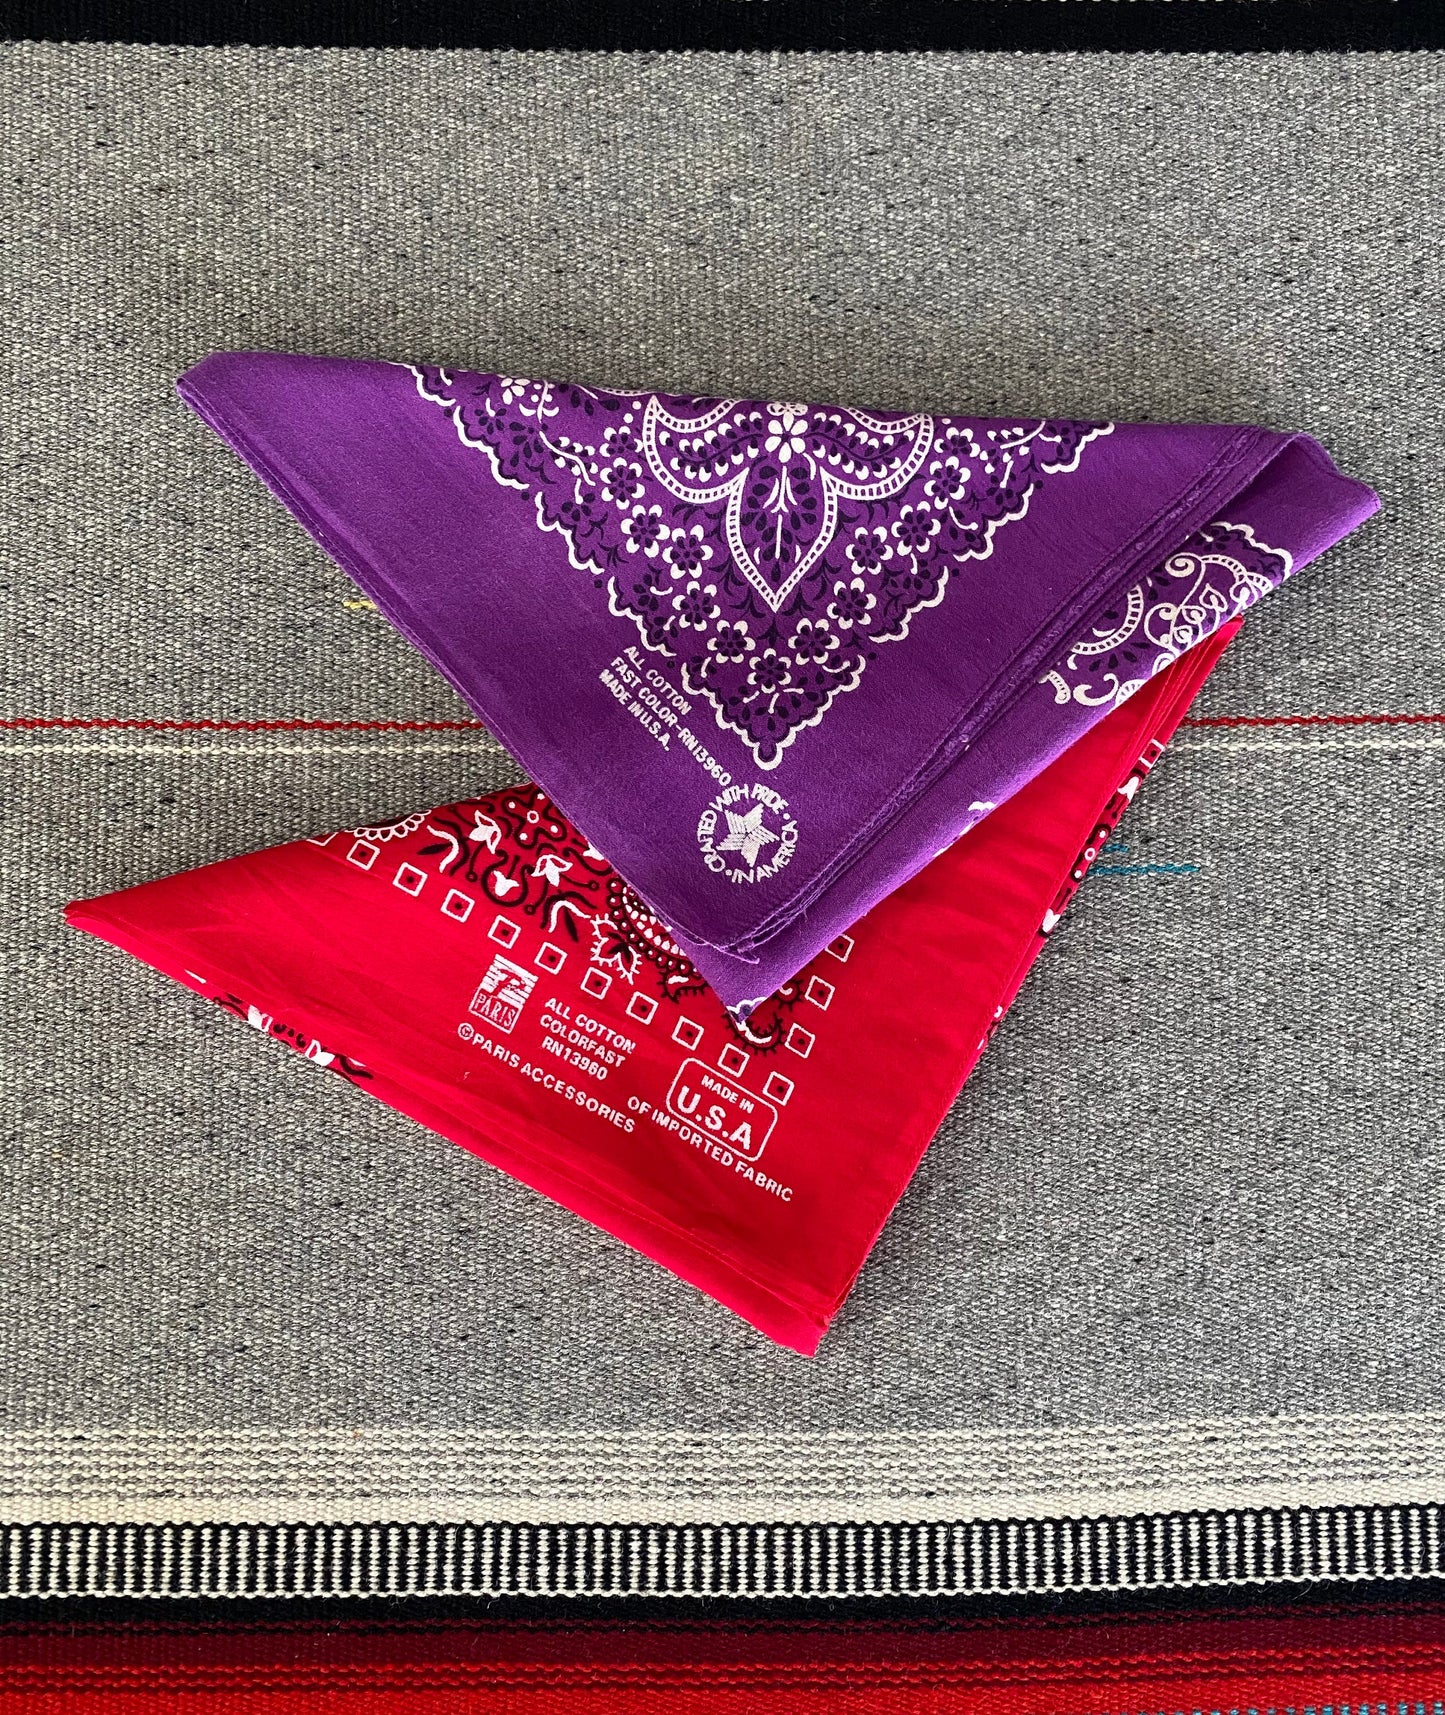 2 Vintage Bandanas Made in USA. One Red, one Purple.